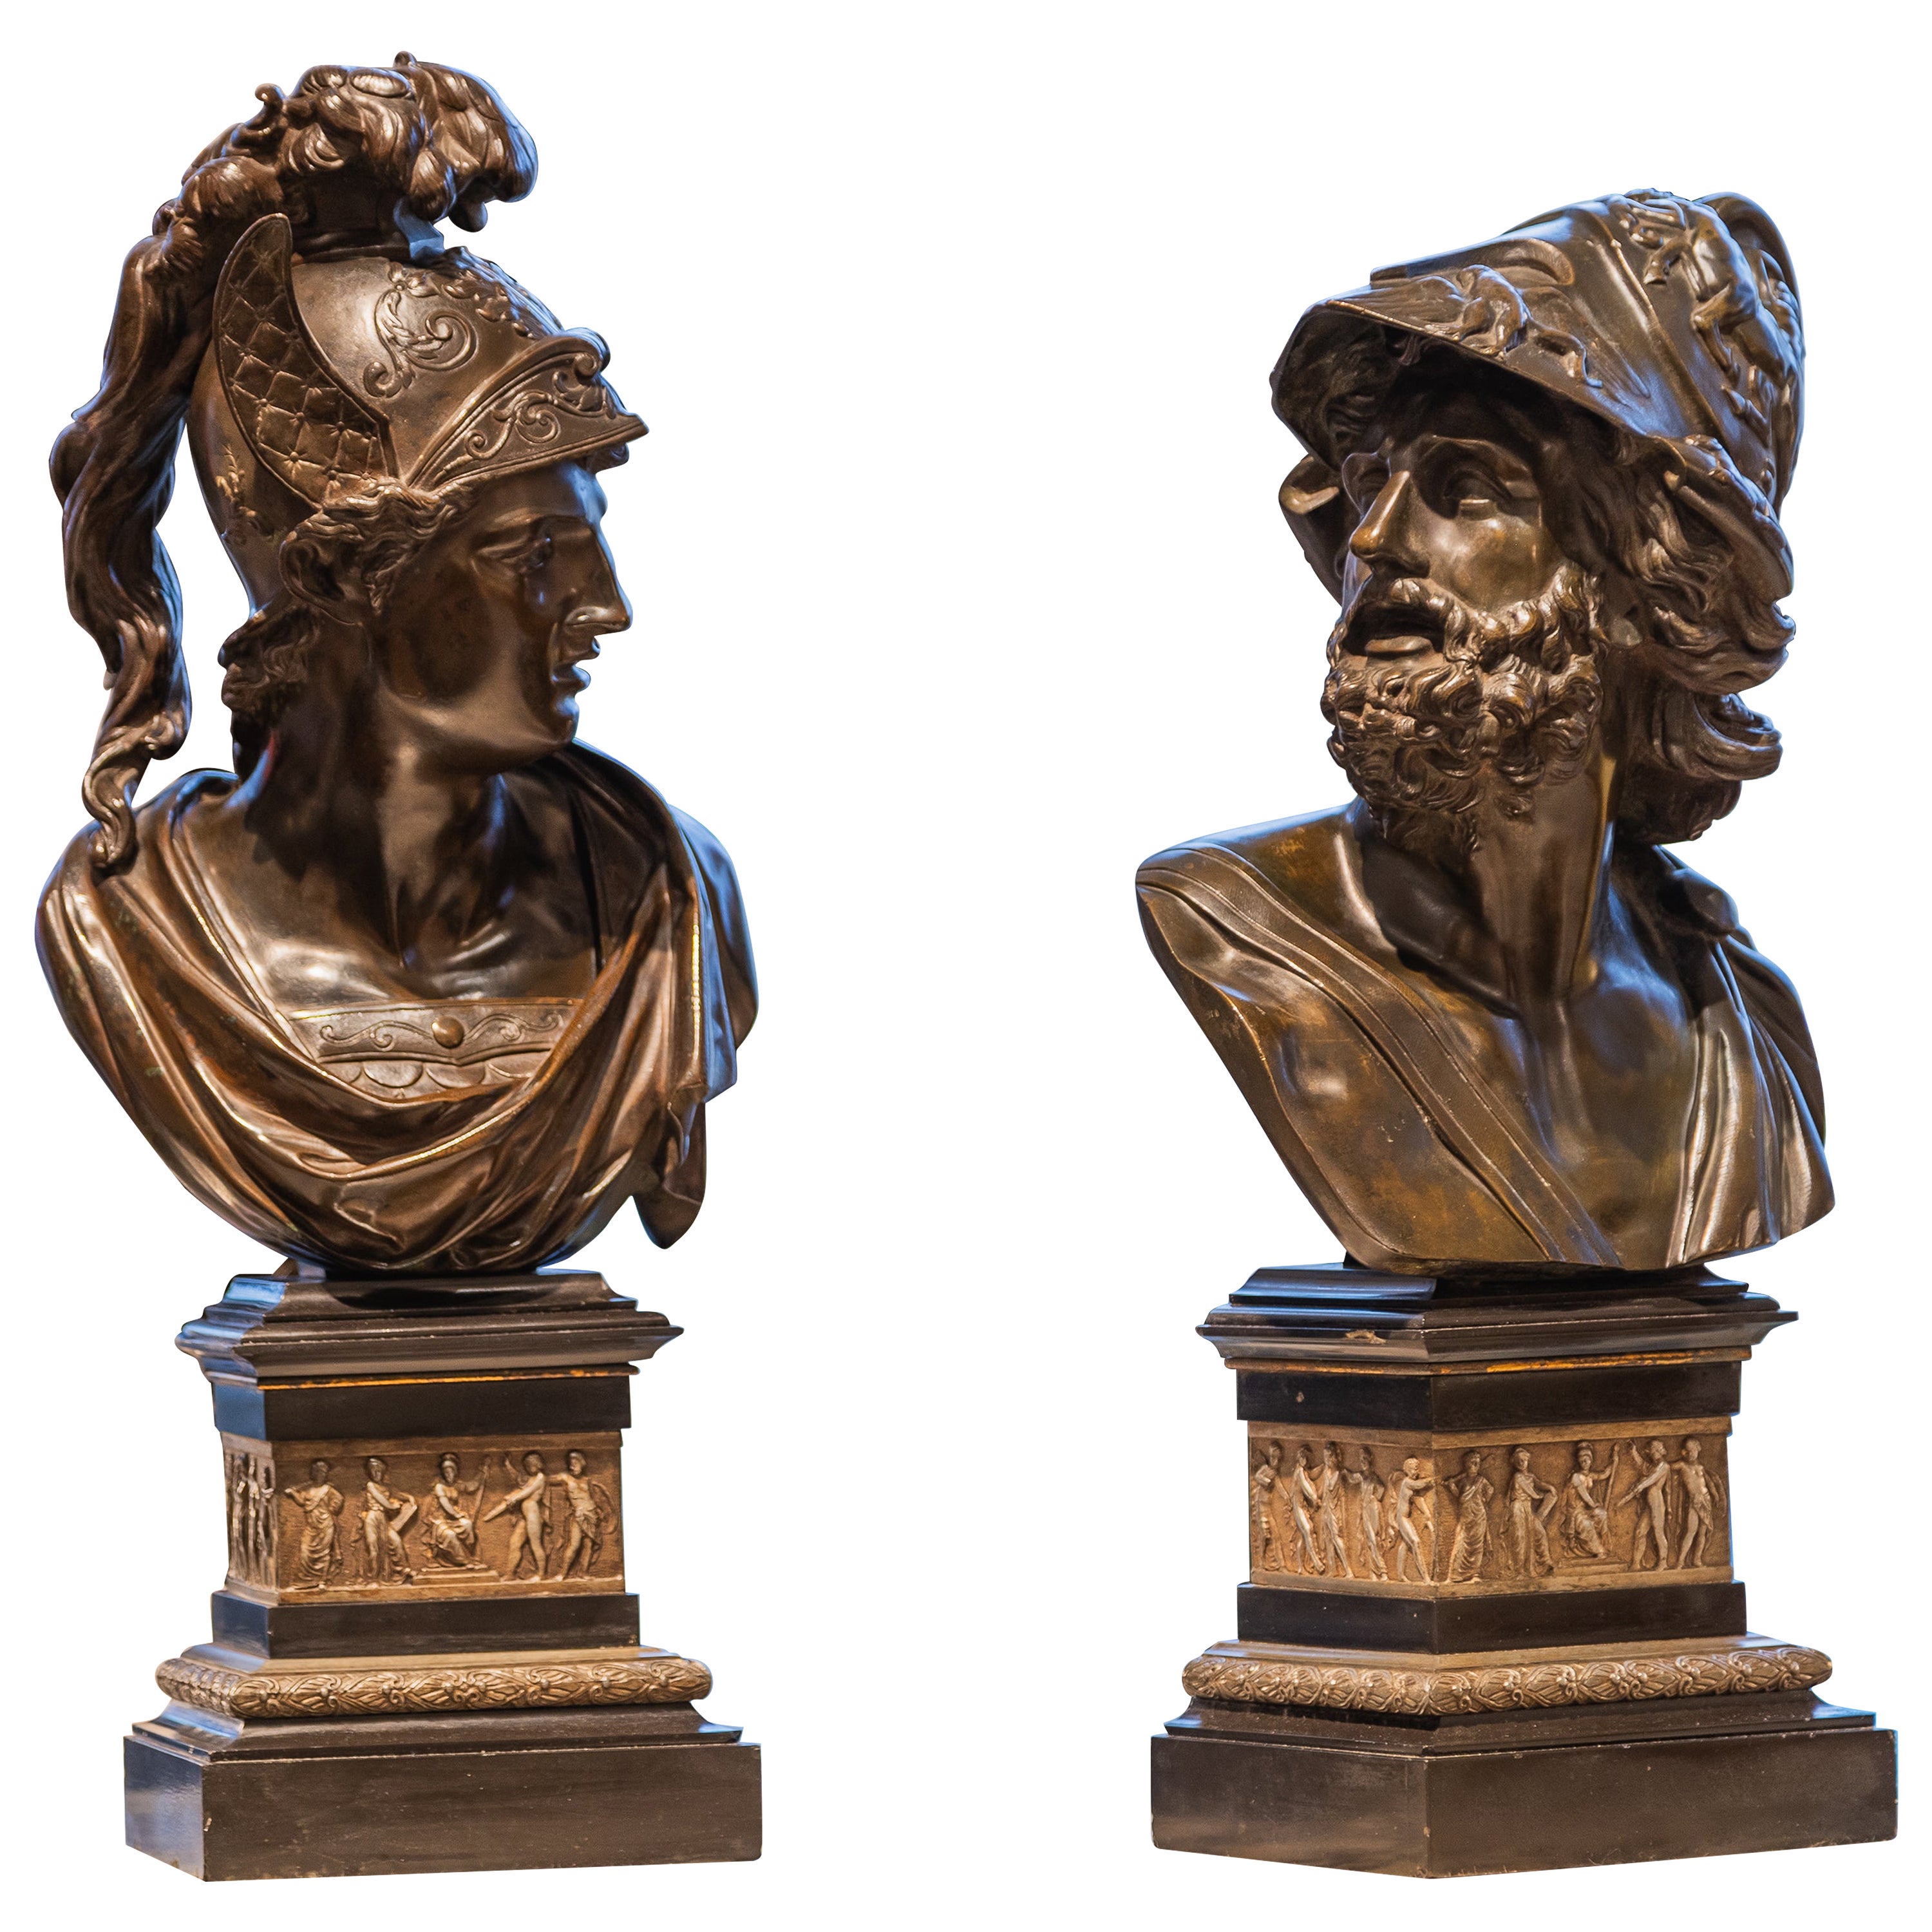 A fine pair of 19th c Classical bronzes by Henry Bonnard Bronze Co 1889 For Sale